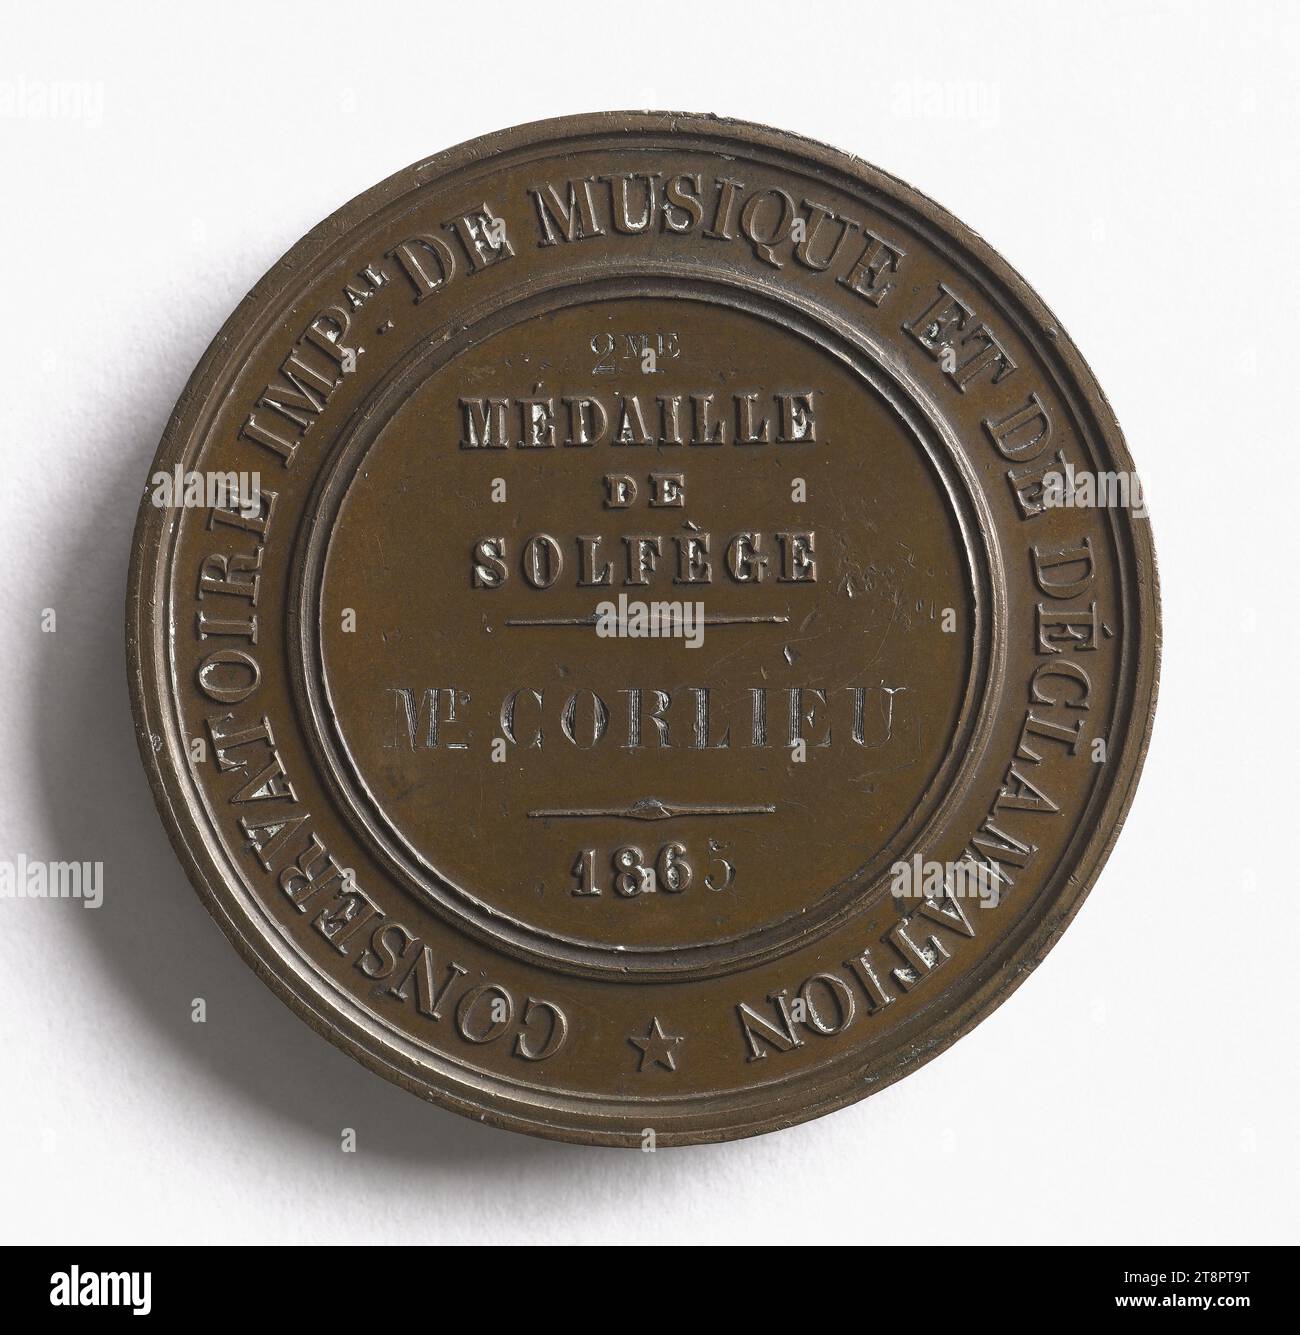 Second medal of solfeggio of the Imperial Conservatory of music and declamation attributed to Corlieu,1865, Barré, Albert-Désiré, Engraver in medals, In 1865, Numismatic, Medal, Dimensions - Work: Diameter: 5.1 cm, Weight (type dimension): 58.6 g Stock Photo